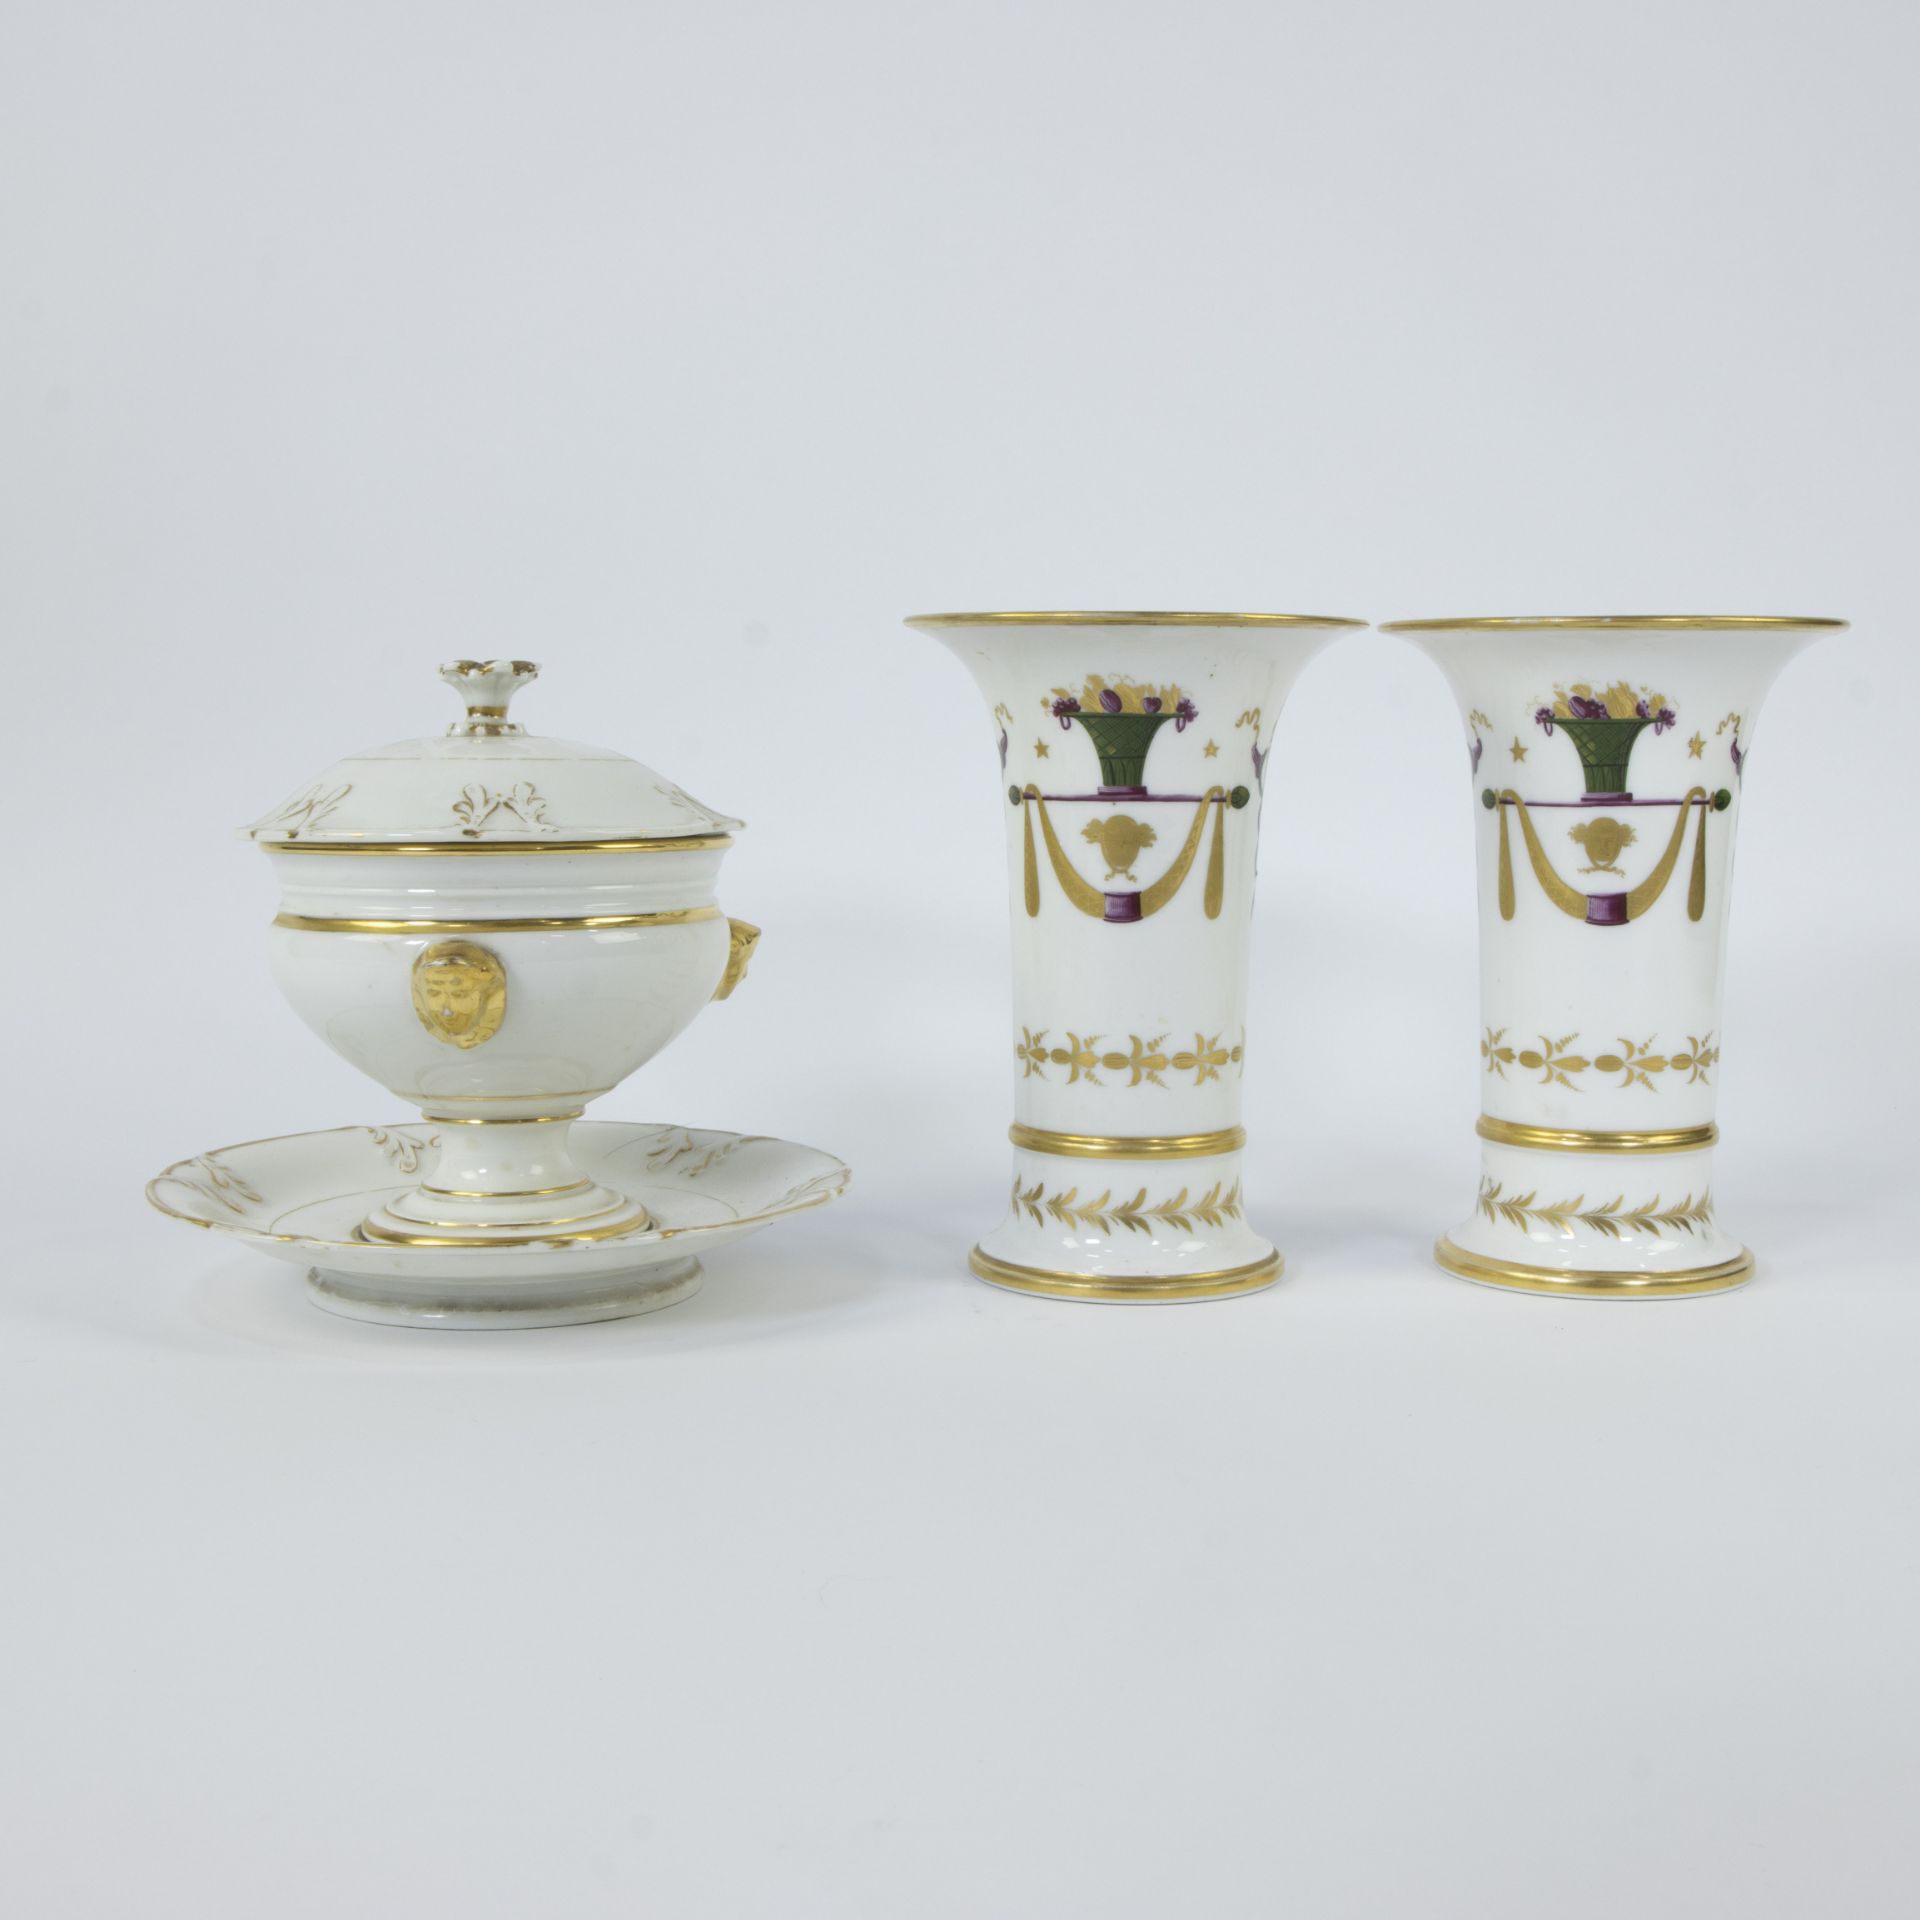 Collection of Empire porcelain, pair of vases, lidded bowl, 2 sugar shakers and plate with coat of a - Bild 4 aus 6